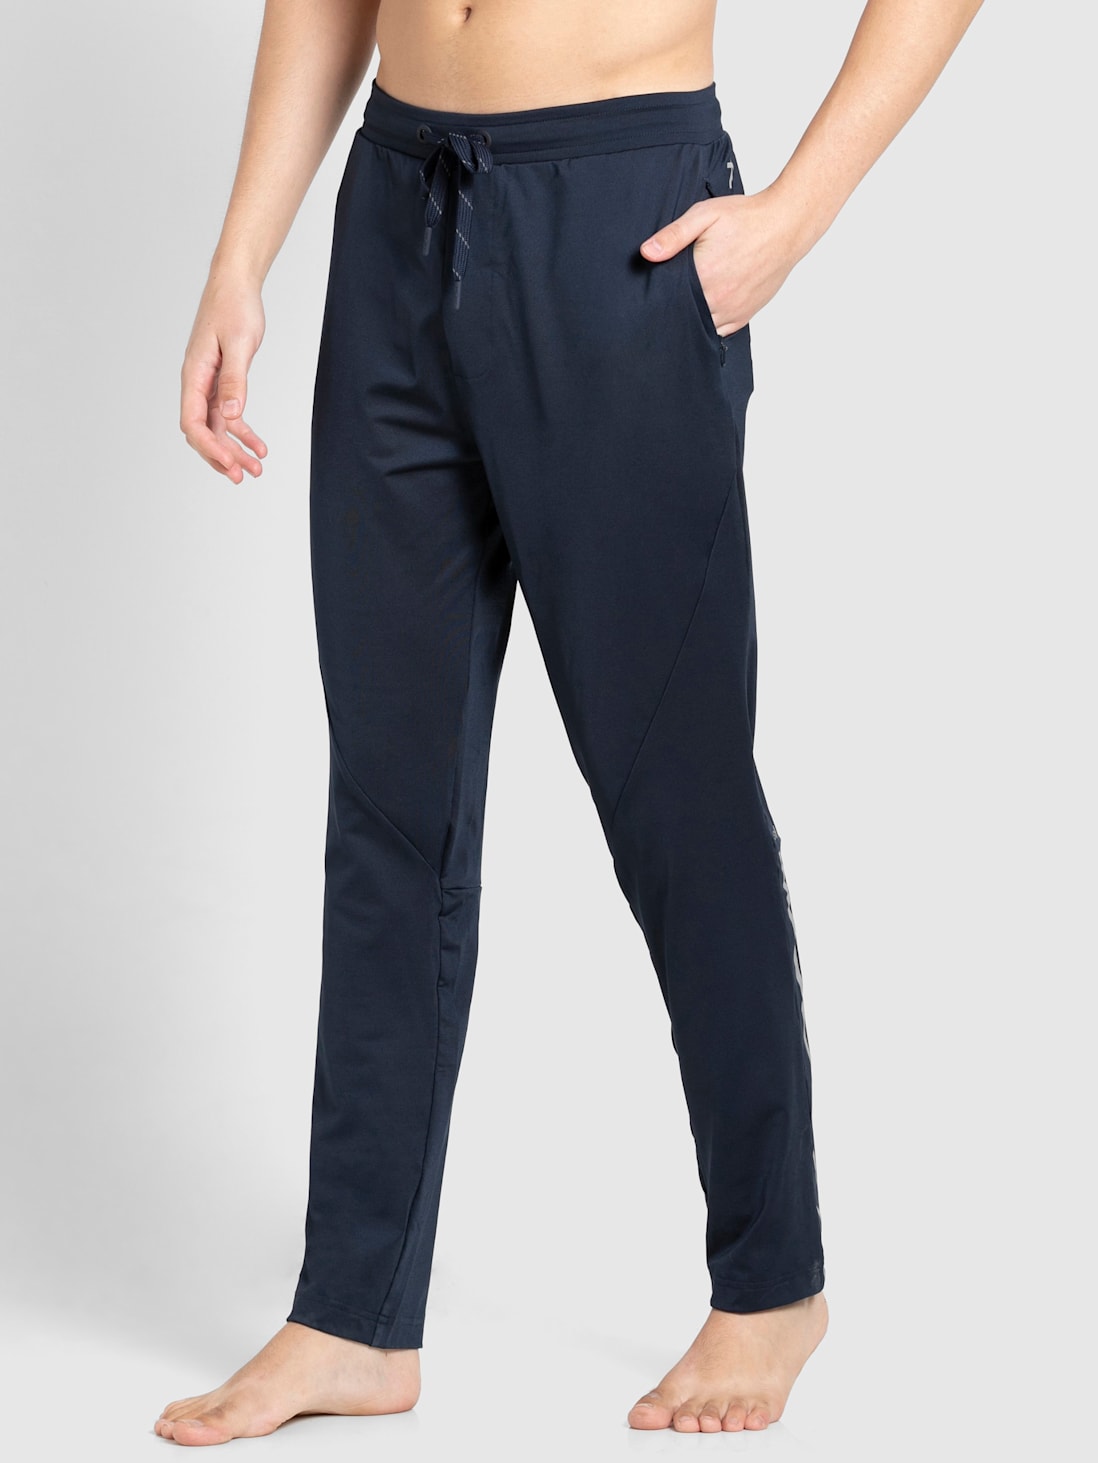 Jockey Womens Athleisure Track Pant 1301 Lower  Online Shopping site in  India